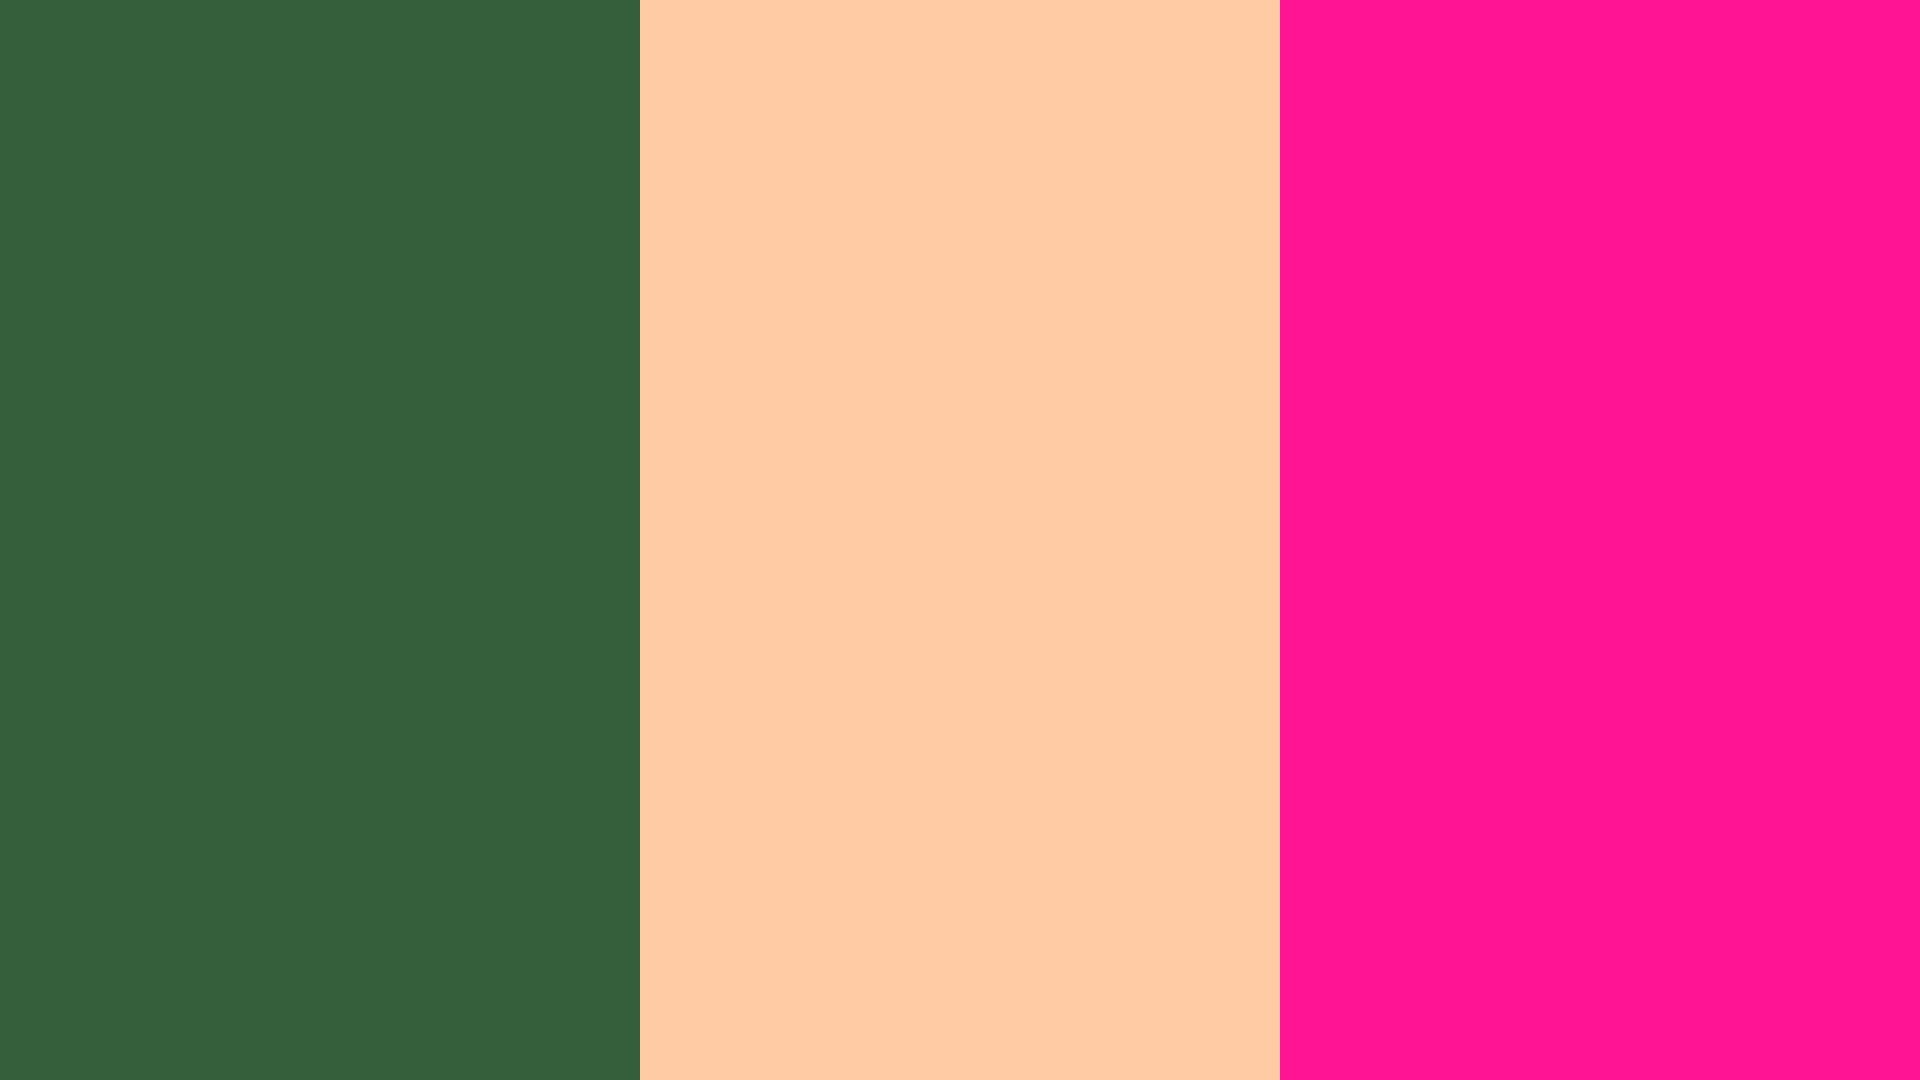 Deep Moss Green Peach And Pink Three Color Background